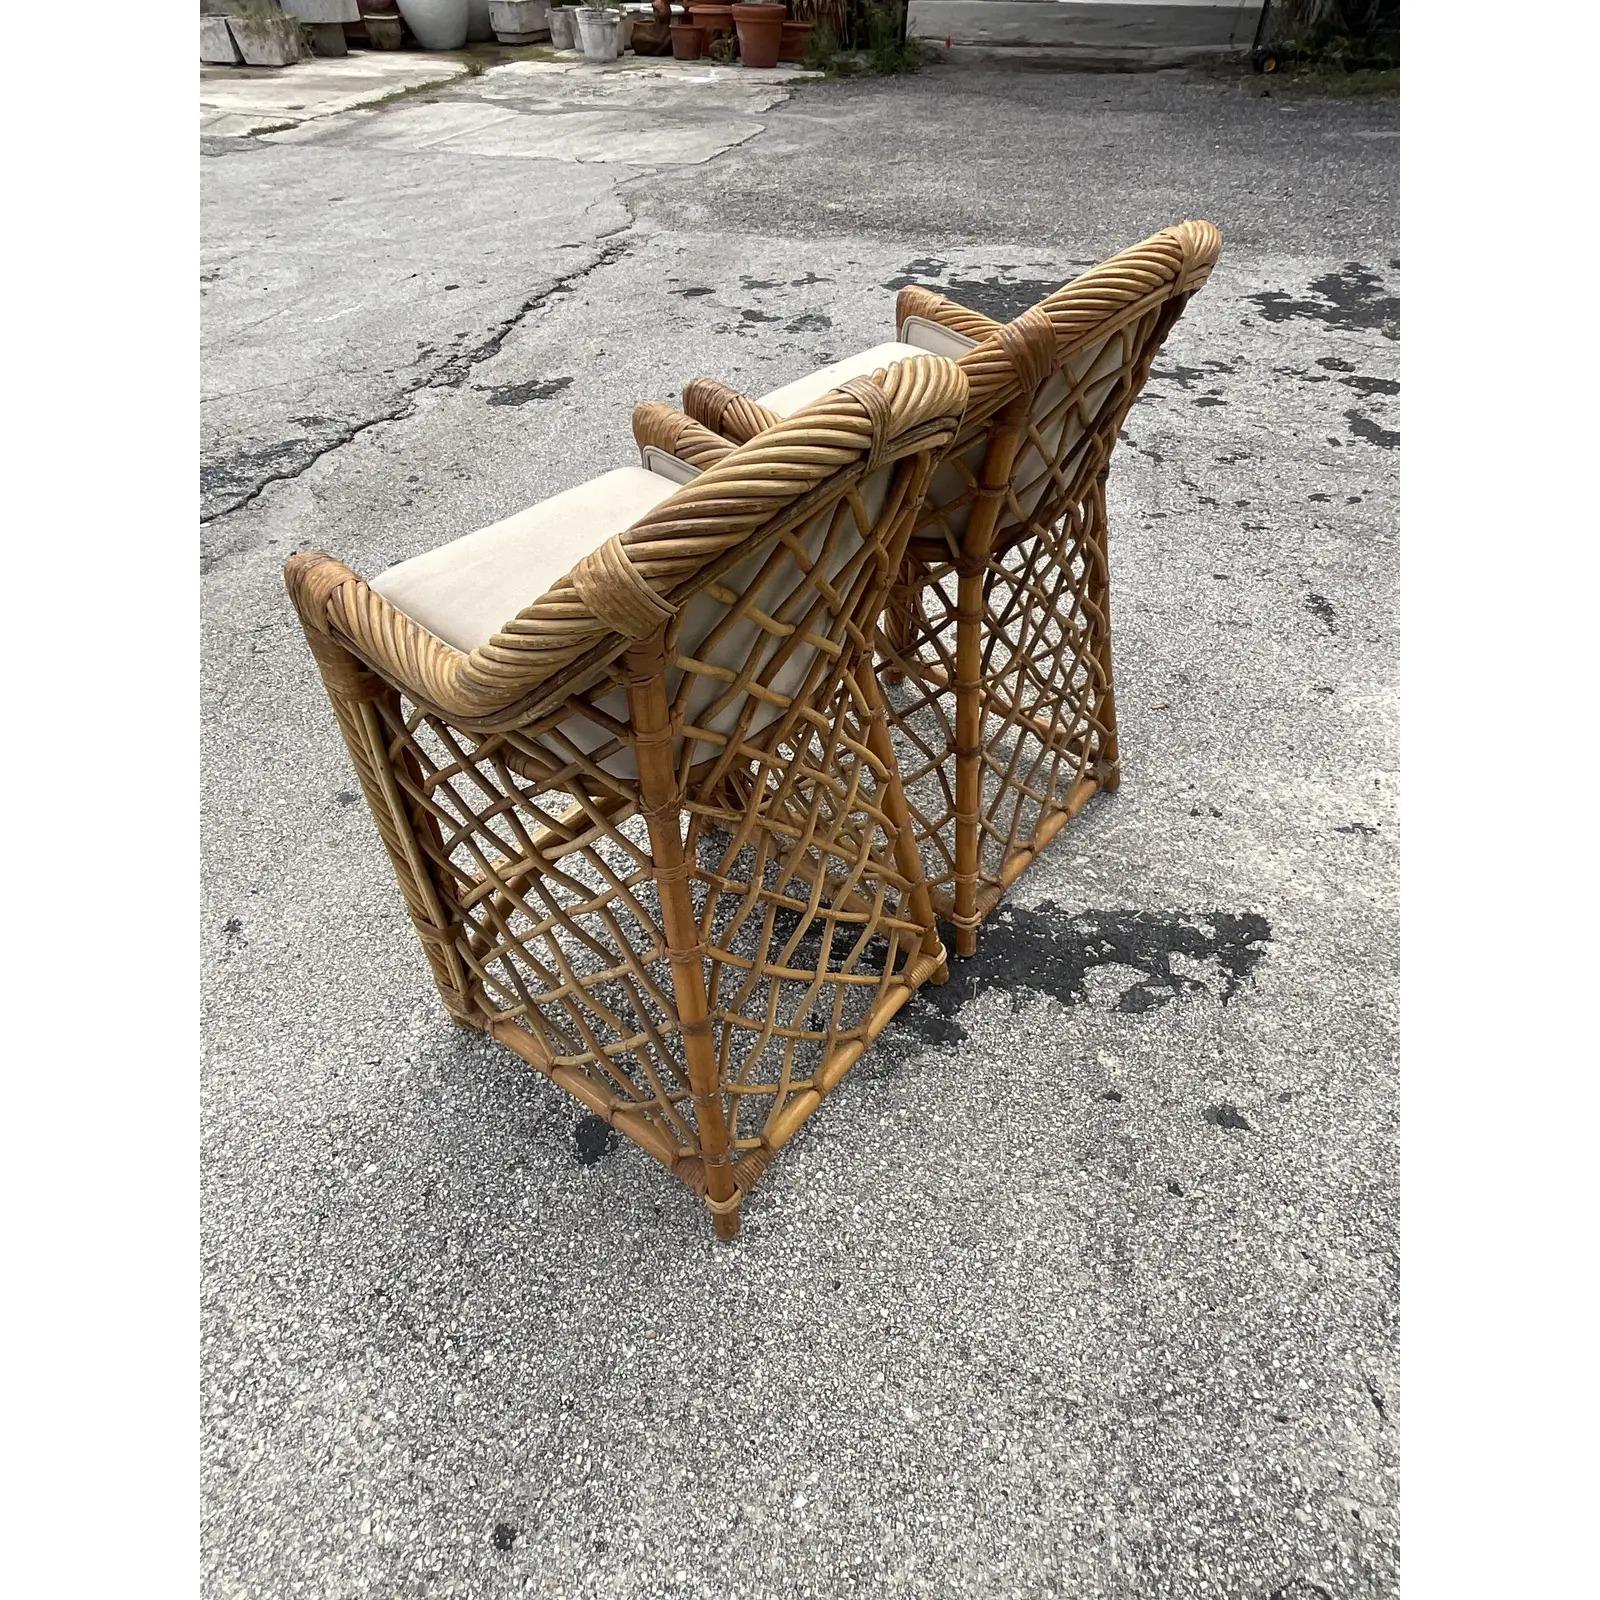 Fabulous pair of vintage Coastal bar stools. Beautiful heavy twisted rattan with panels of trellis design. Acquired from a Palm Beach estate.